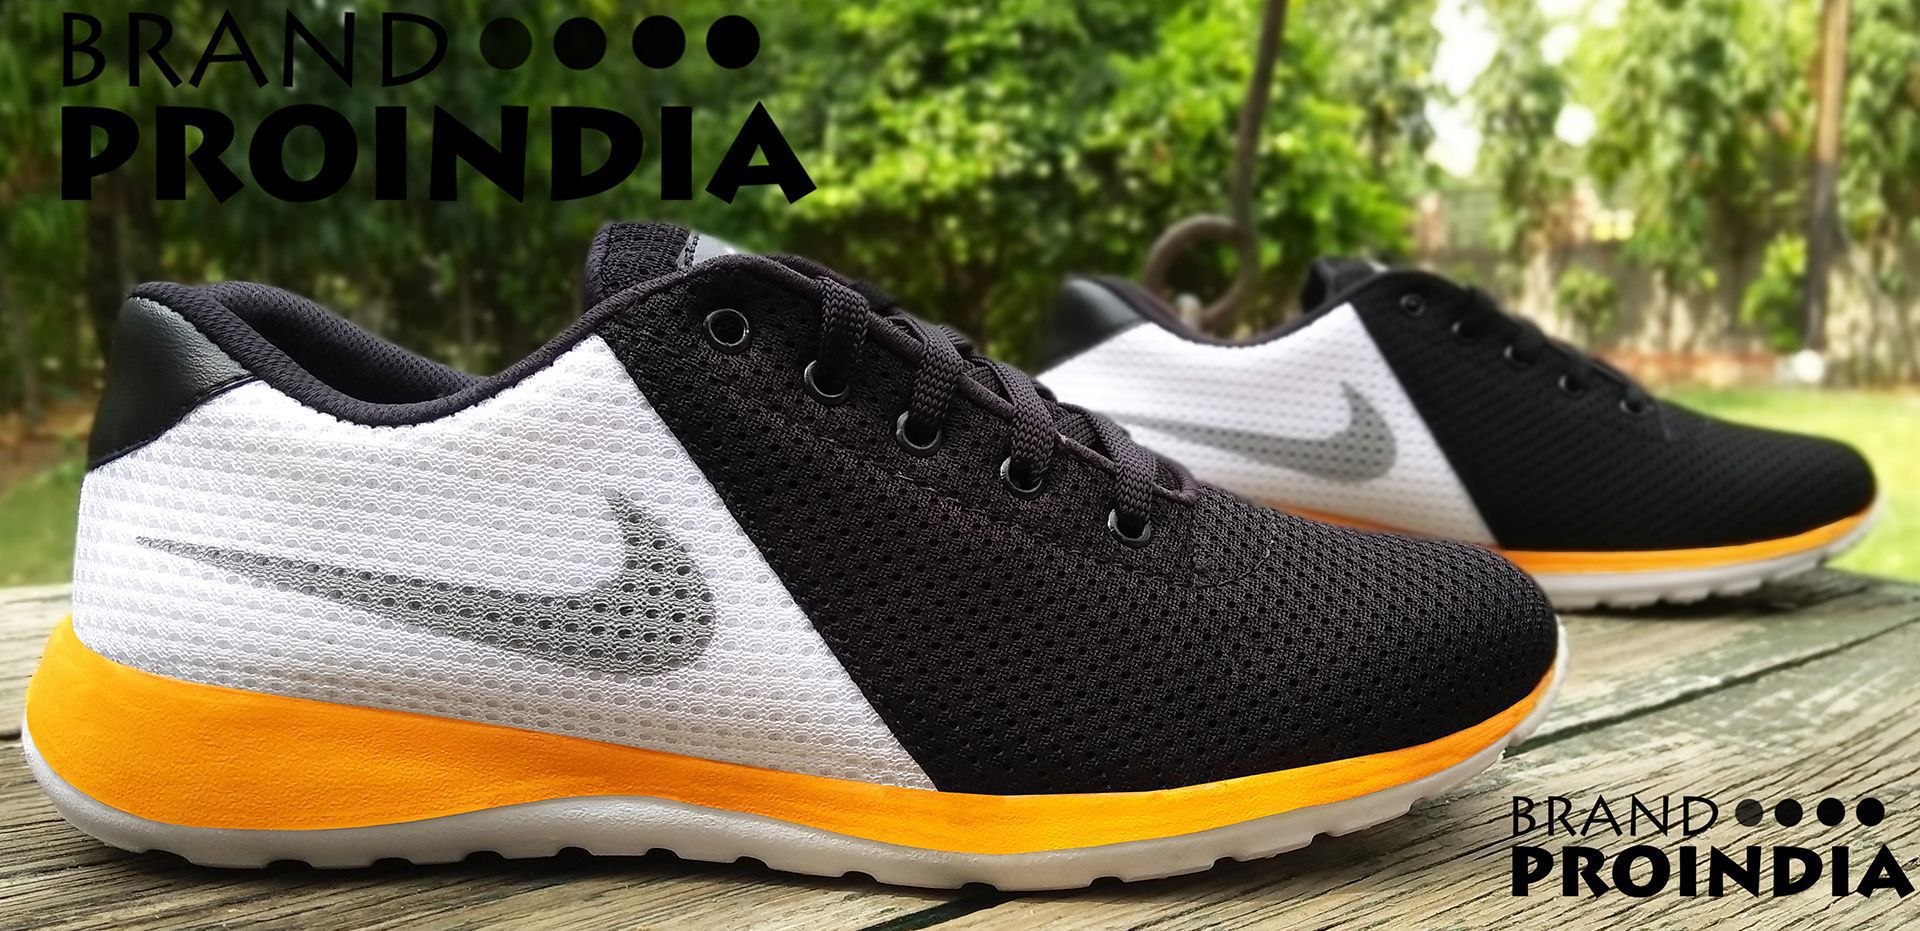 proindia white casual shoes